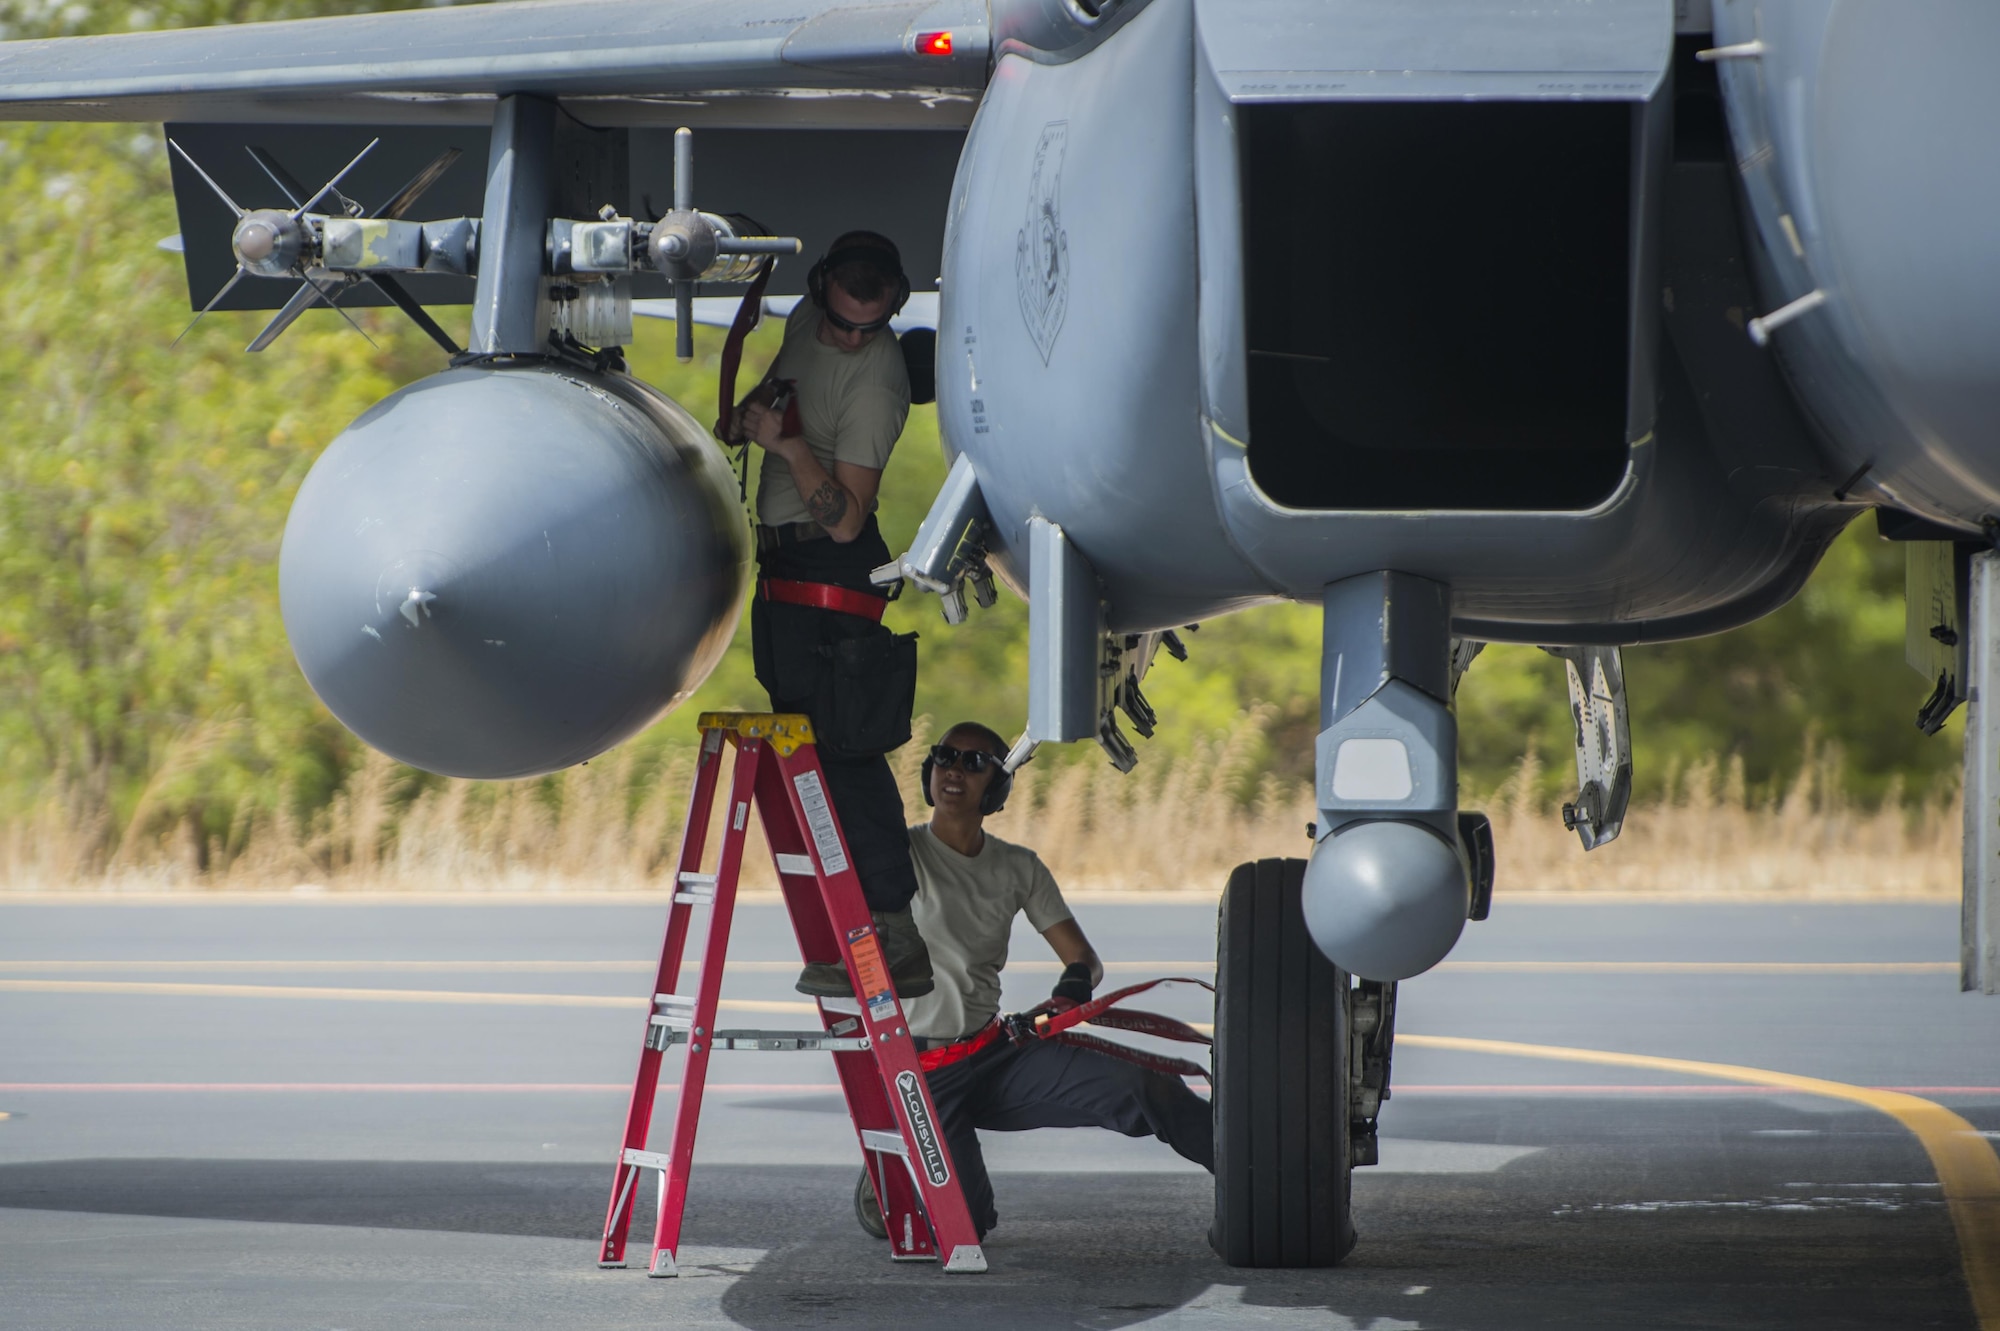 Senior Airman Jackson Dancy, left, and Airman 1st Class Alexis Rodriguez, 494th Air Craft Maintenance Unit load crew member, prepare an F-15E Strike Eagle prior to a sortie in support of Tactical Leadership Programme 16-3 at Los Llanos Air Base, Spain Sep. 14, 2016. Throughout its 39 year history, TLP has become the focal point for NATO’s Allied Air Forces tactical training, developing knowledge and leadership skills, necessary to face today's air tactical challenges. (U.S. Air Force photo/ Staff Sgt. Emerson Nuñez)